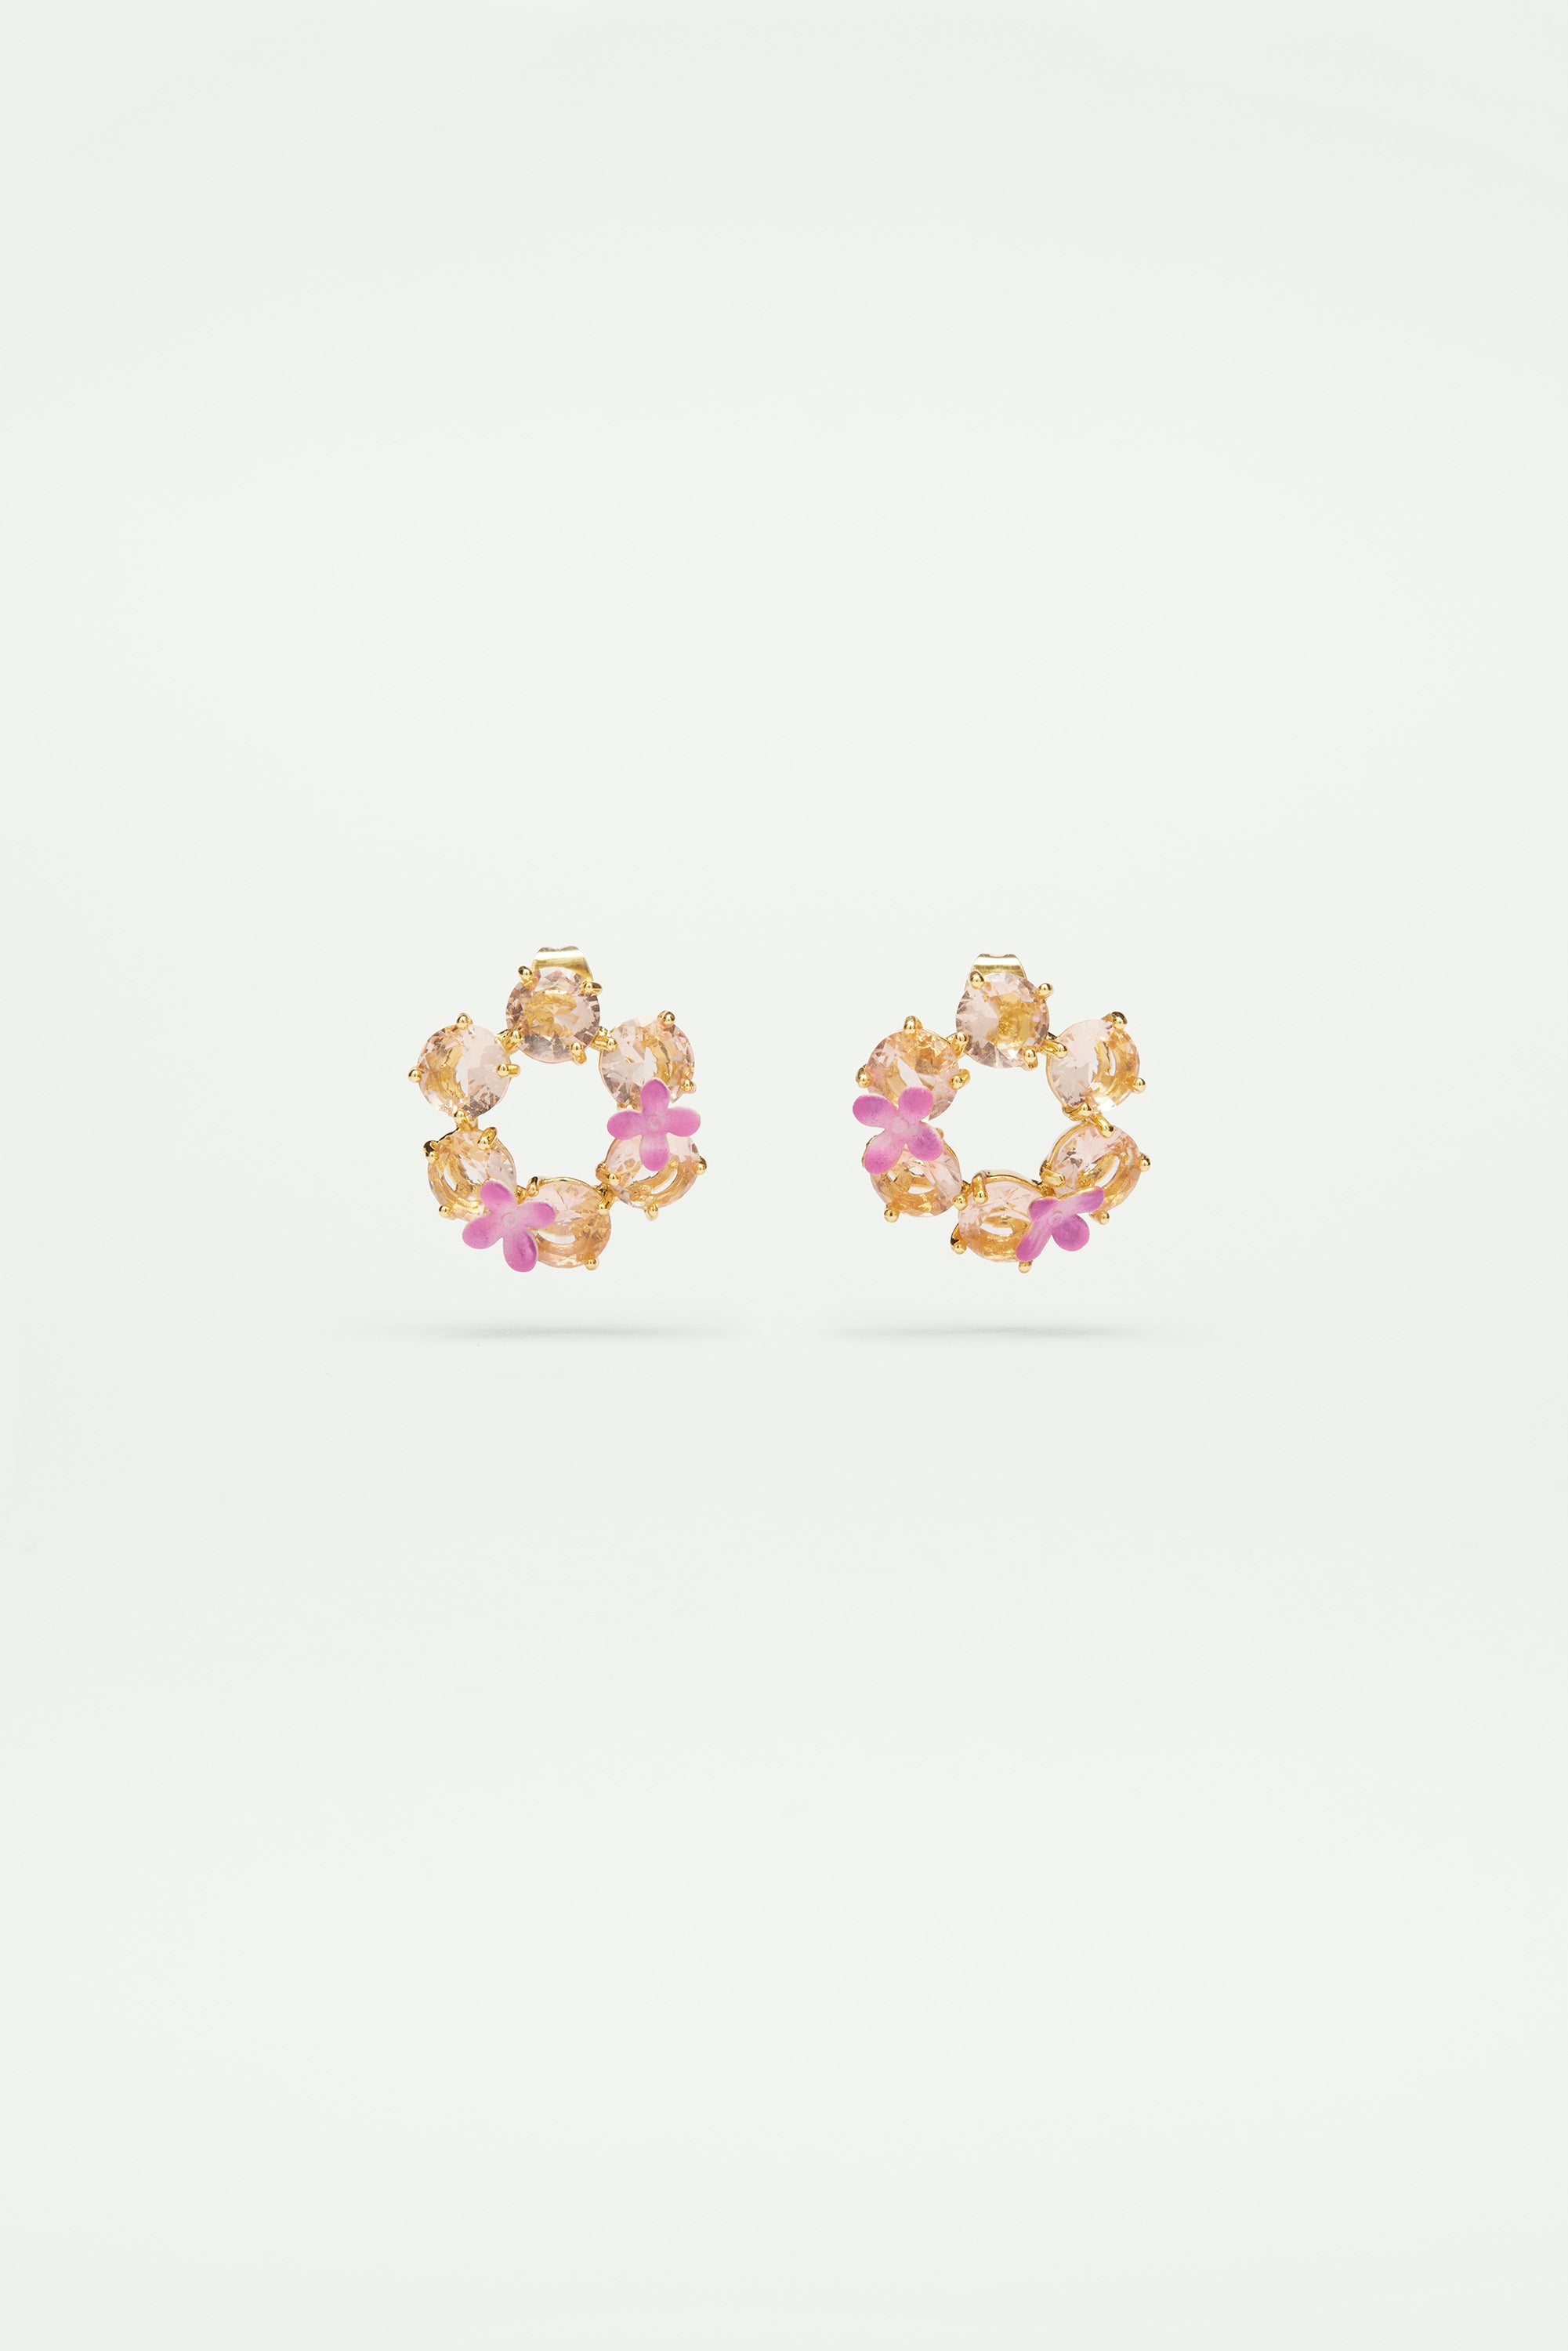 Apricot pink diamantine 6 round stone post earrings